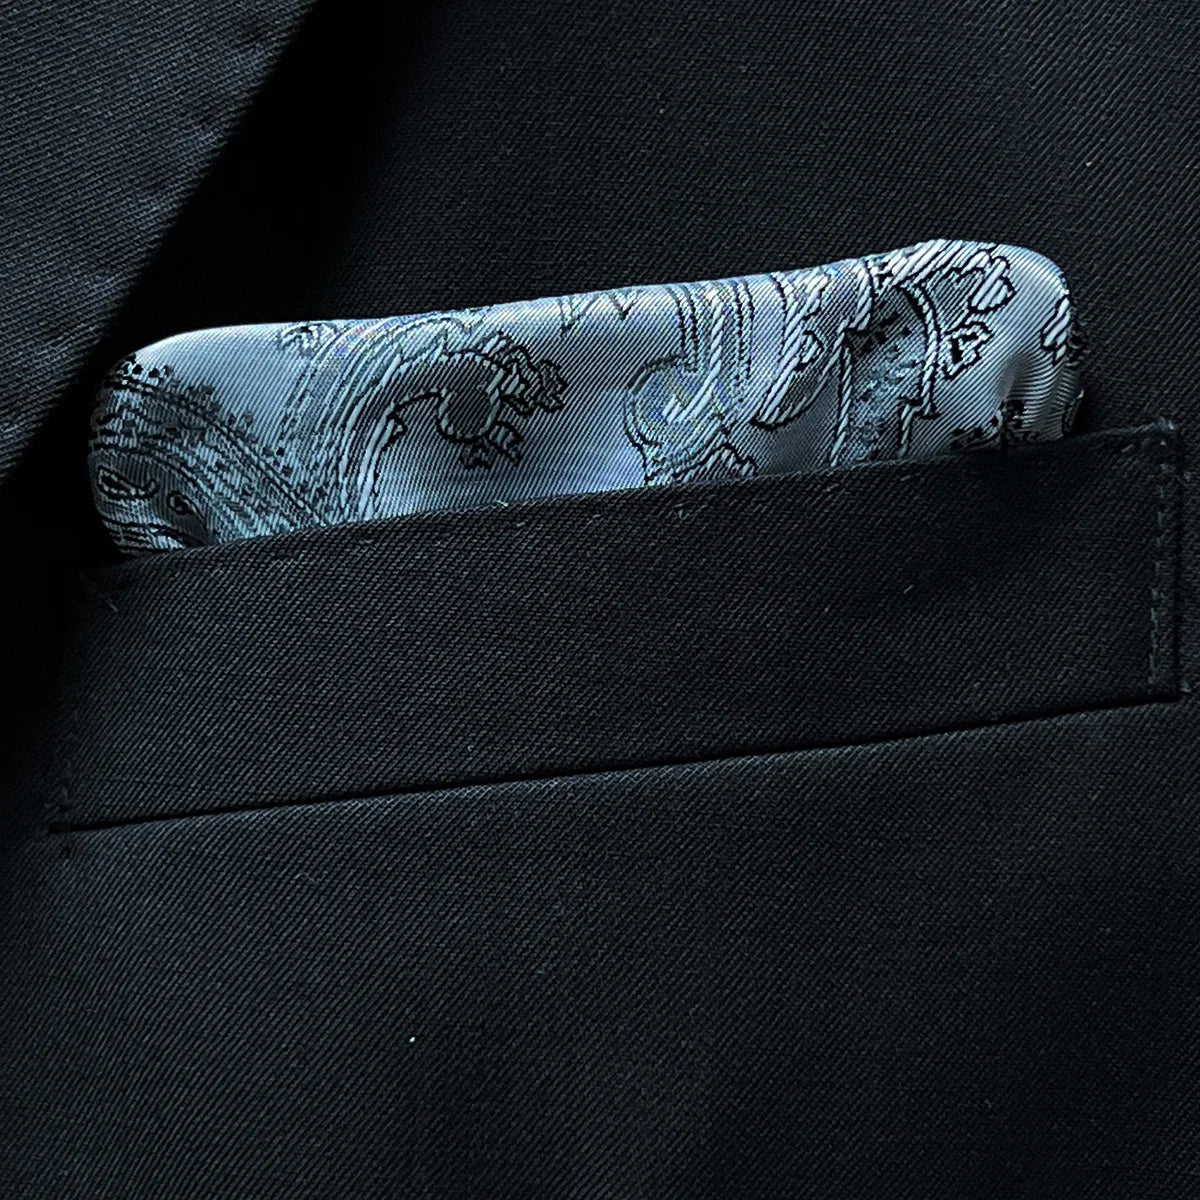 Close-up of a built-in pocket square in the breast pocket of a black Vitale Barberis Canonico suit jacket.